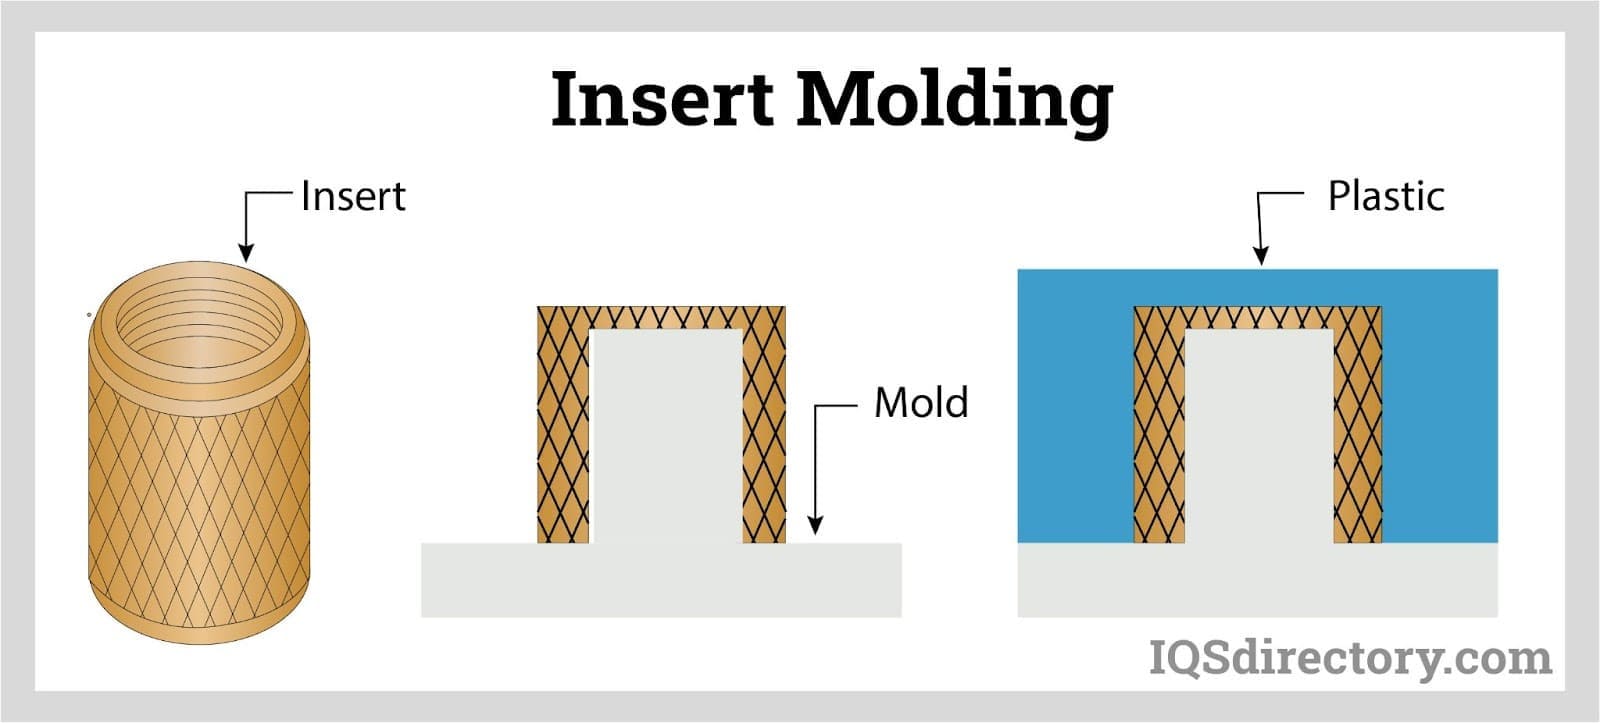 Insert molding and over molding for complex parts